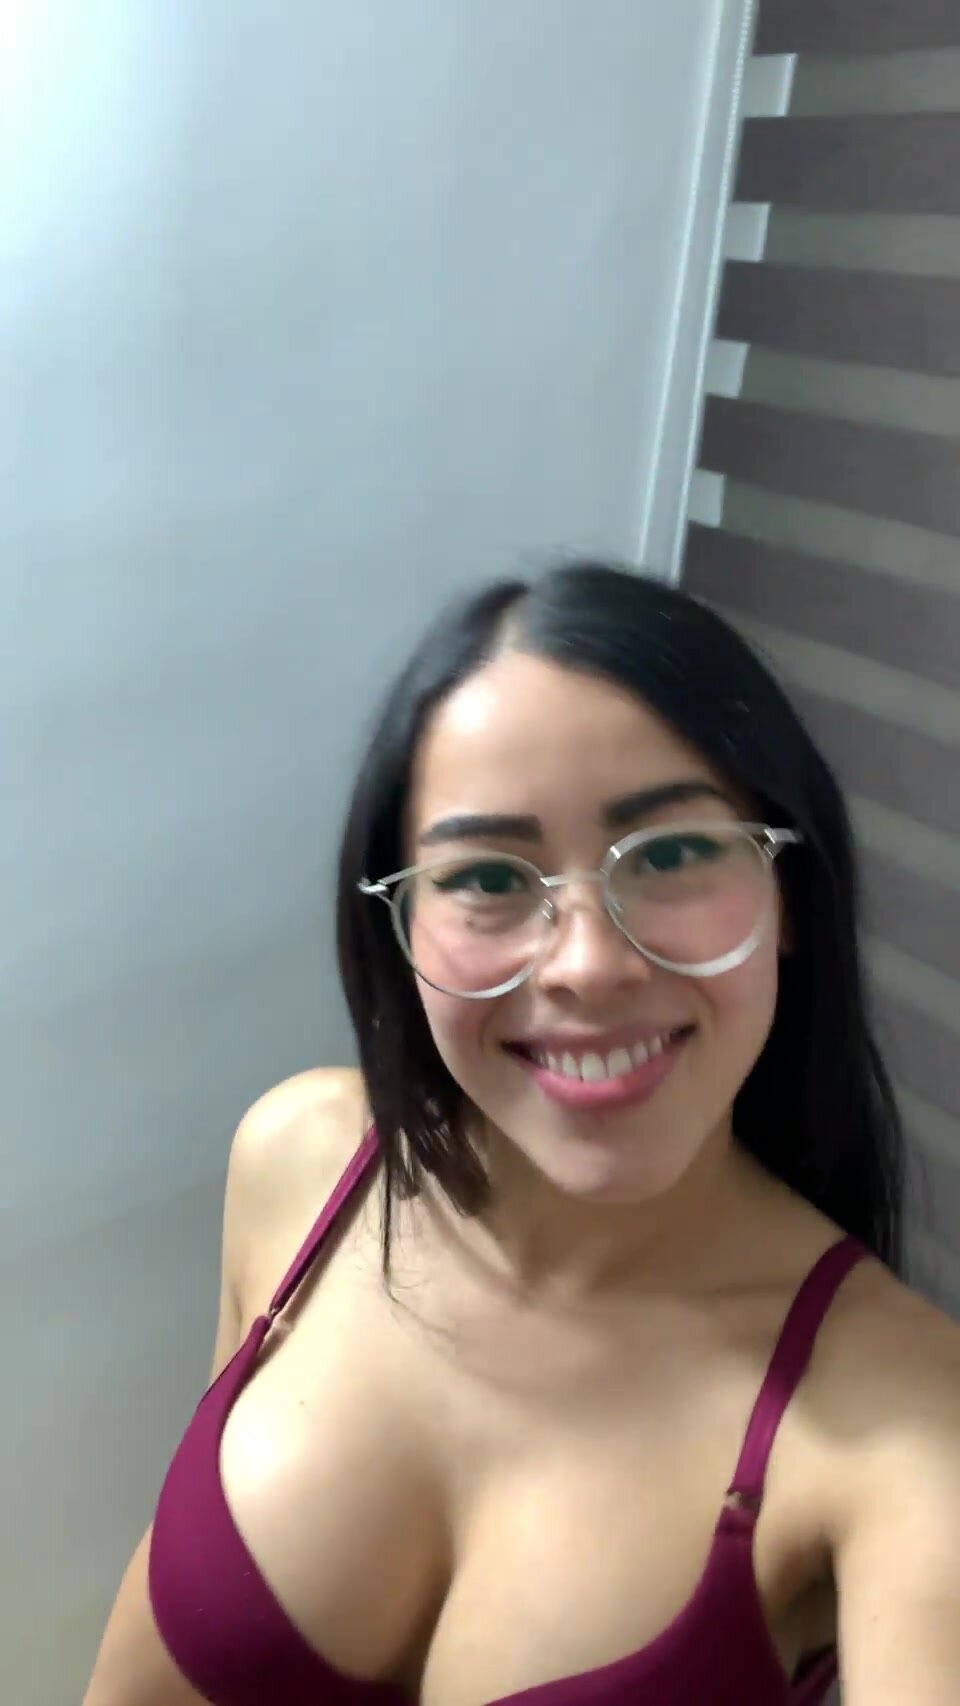 Would you spend a day with an asian cutie like me?